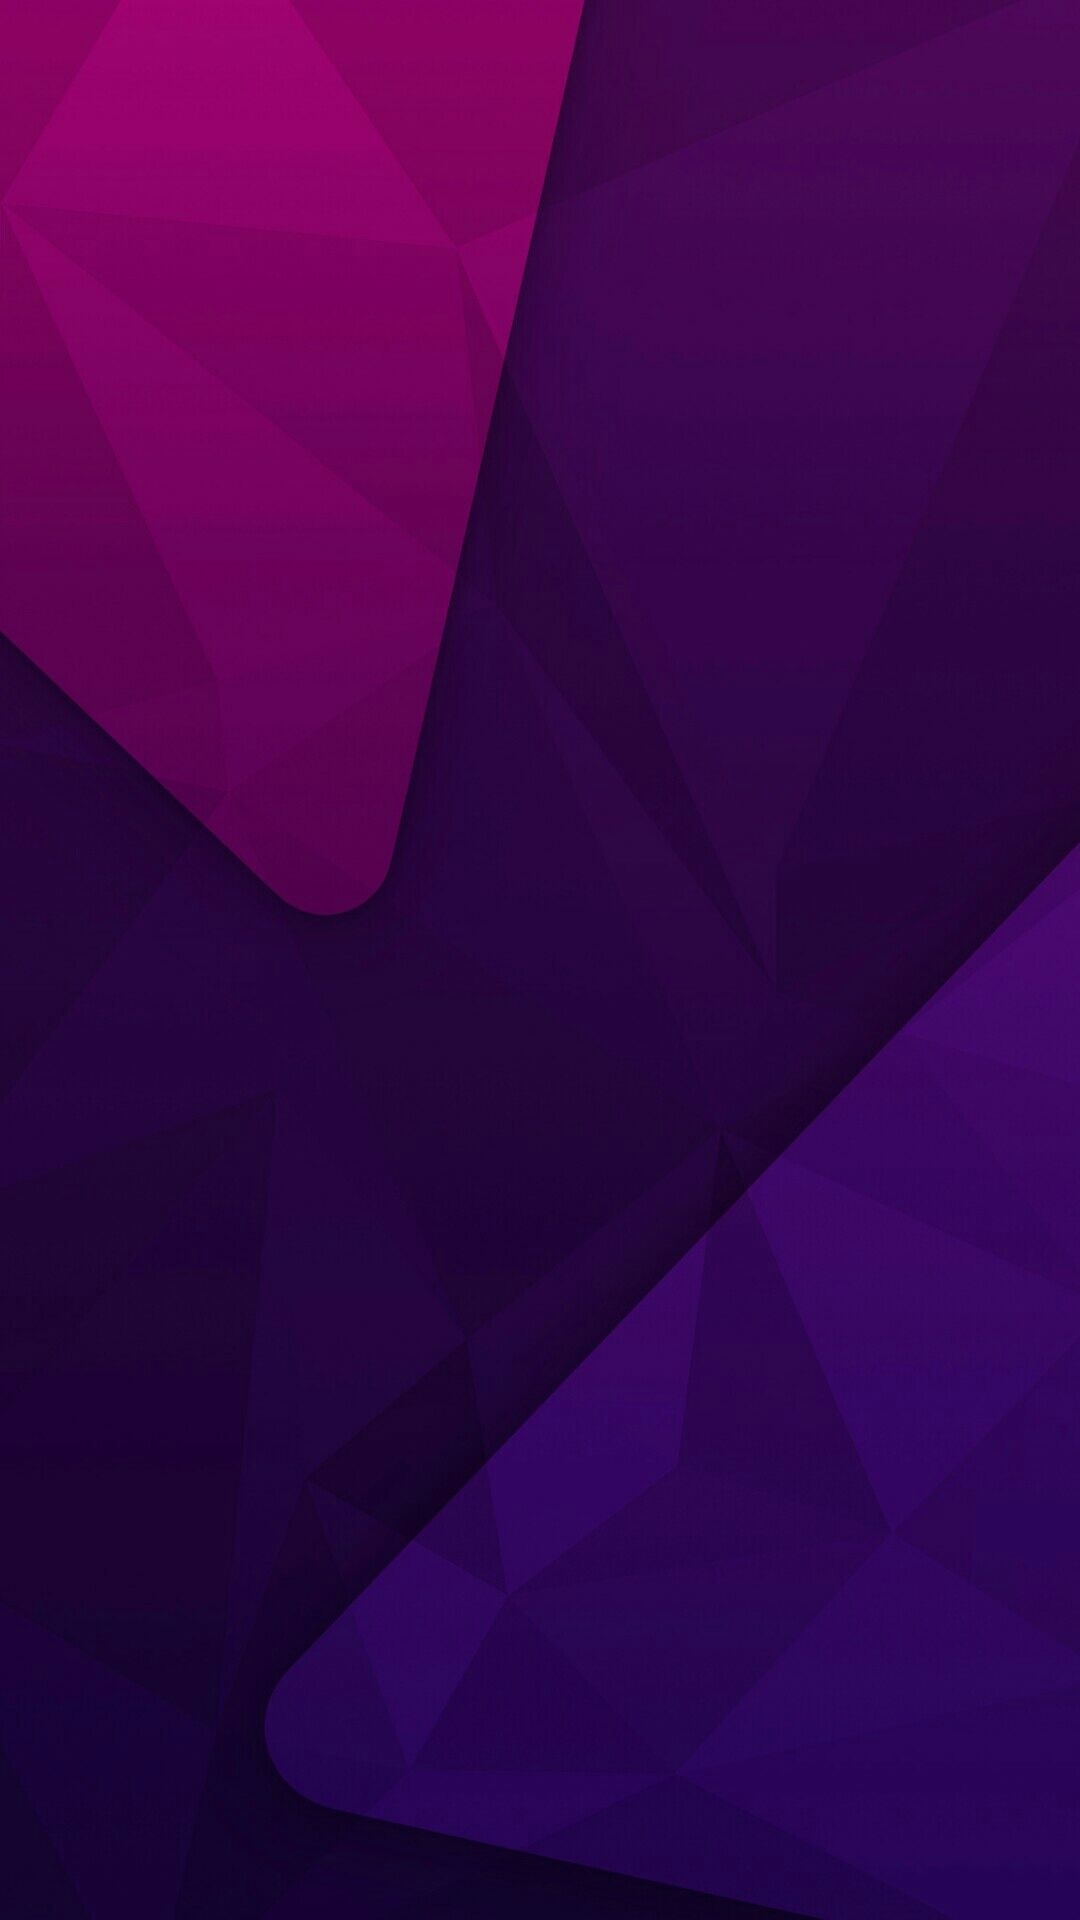 Abstract design pattern, Shape HD mobile wallpaper, Geometric abstract, 1080x1920 Full HD Phone